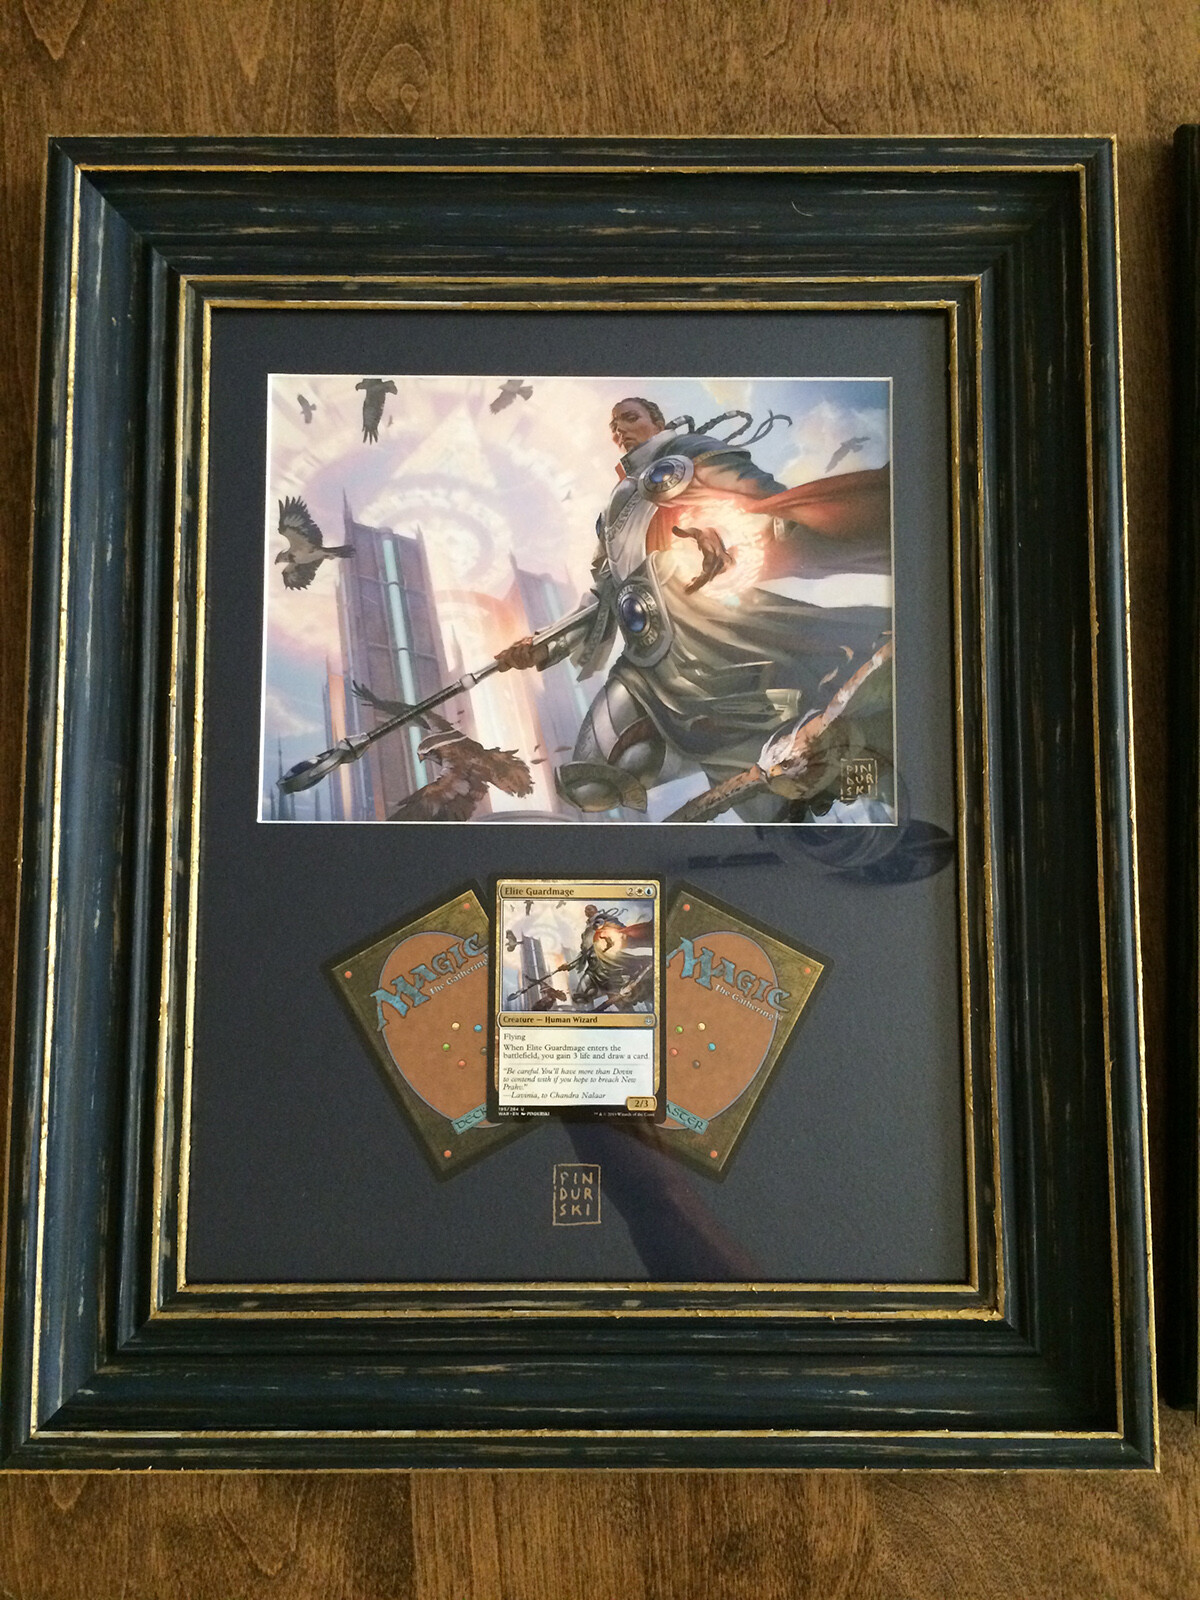 I mean, of course you have to frame your first Magic card. Right?!